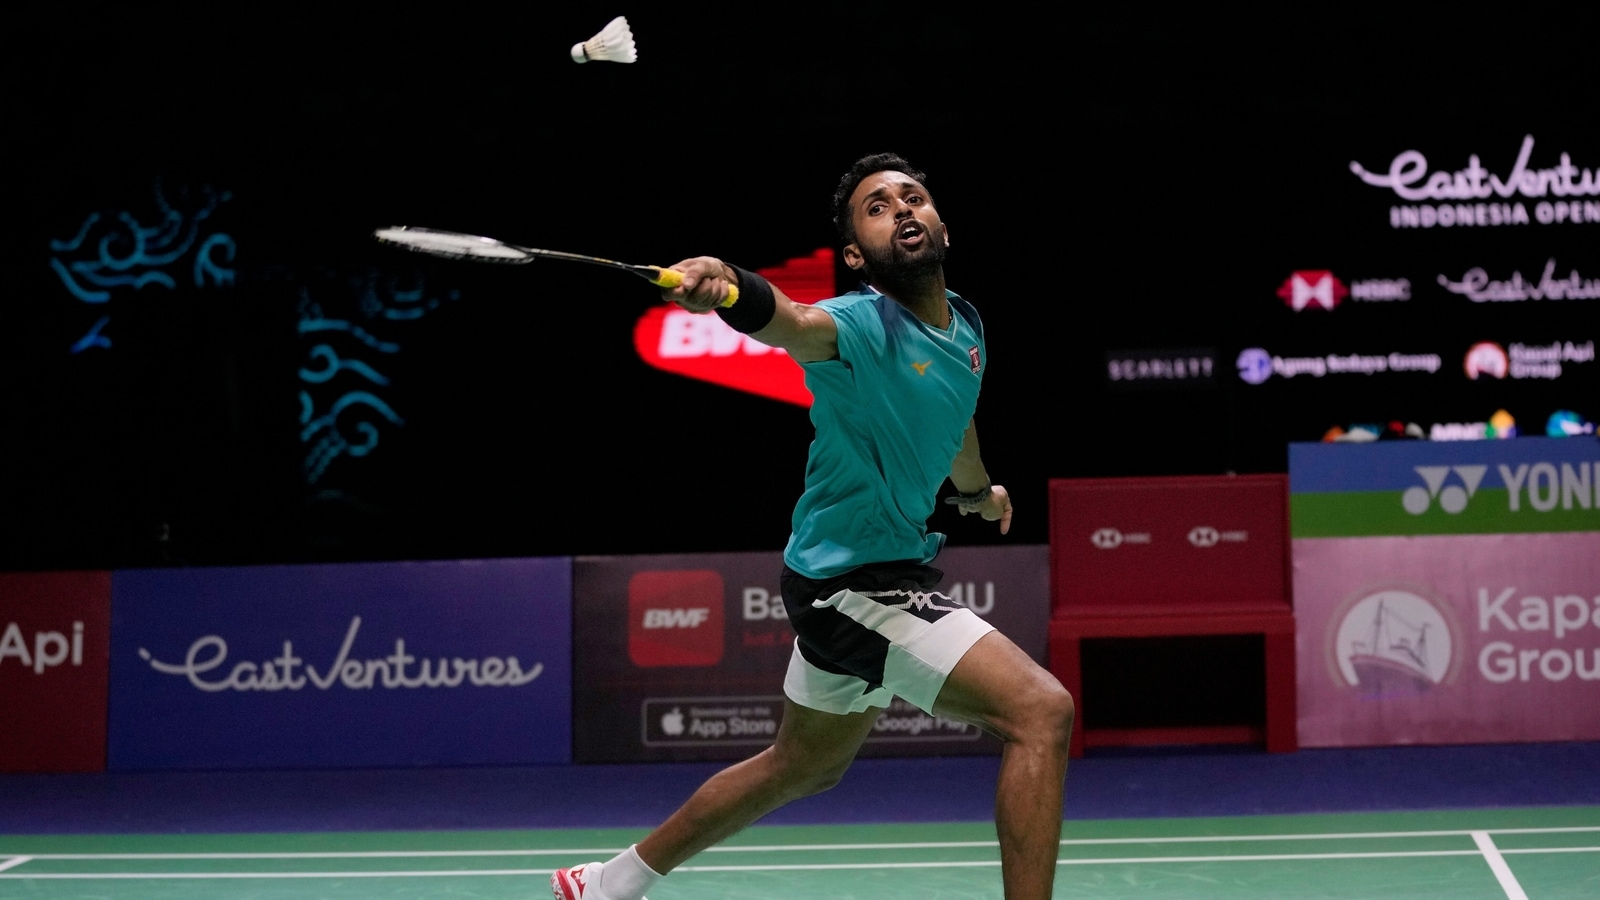 HS Prannoy’s fine run at Indonesian Open ends in semi-finals